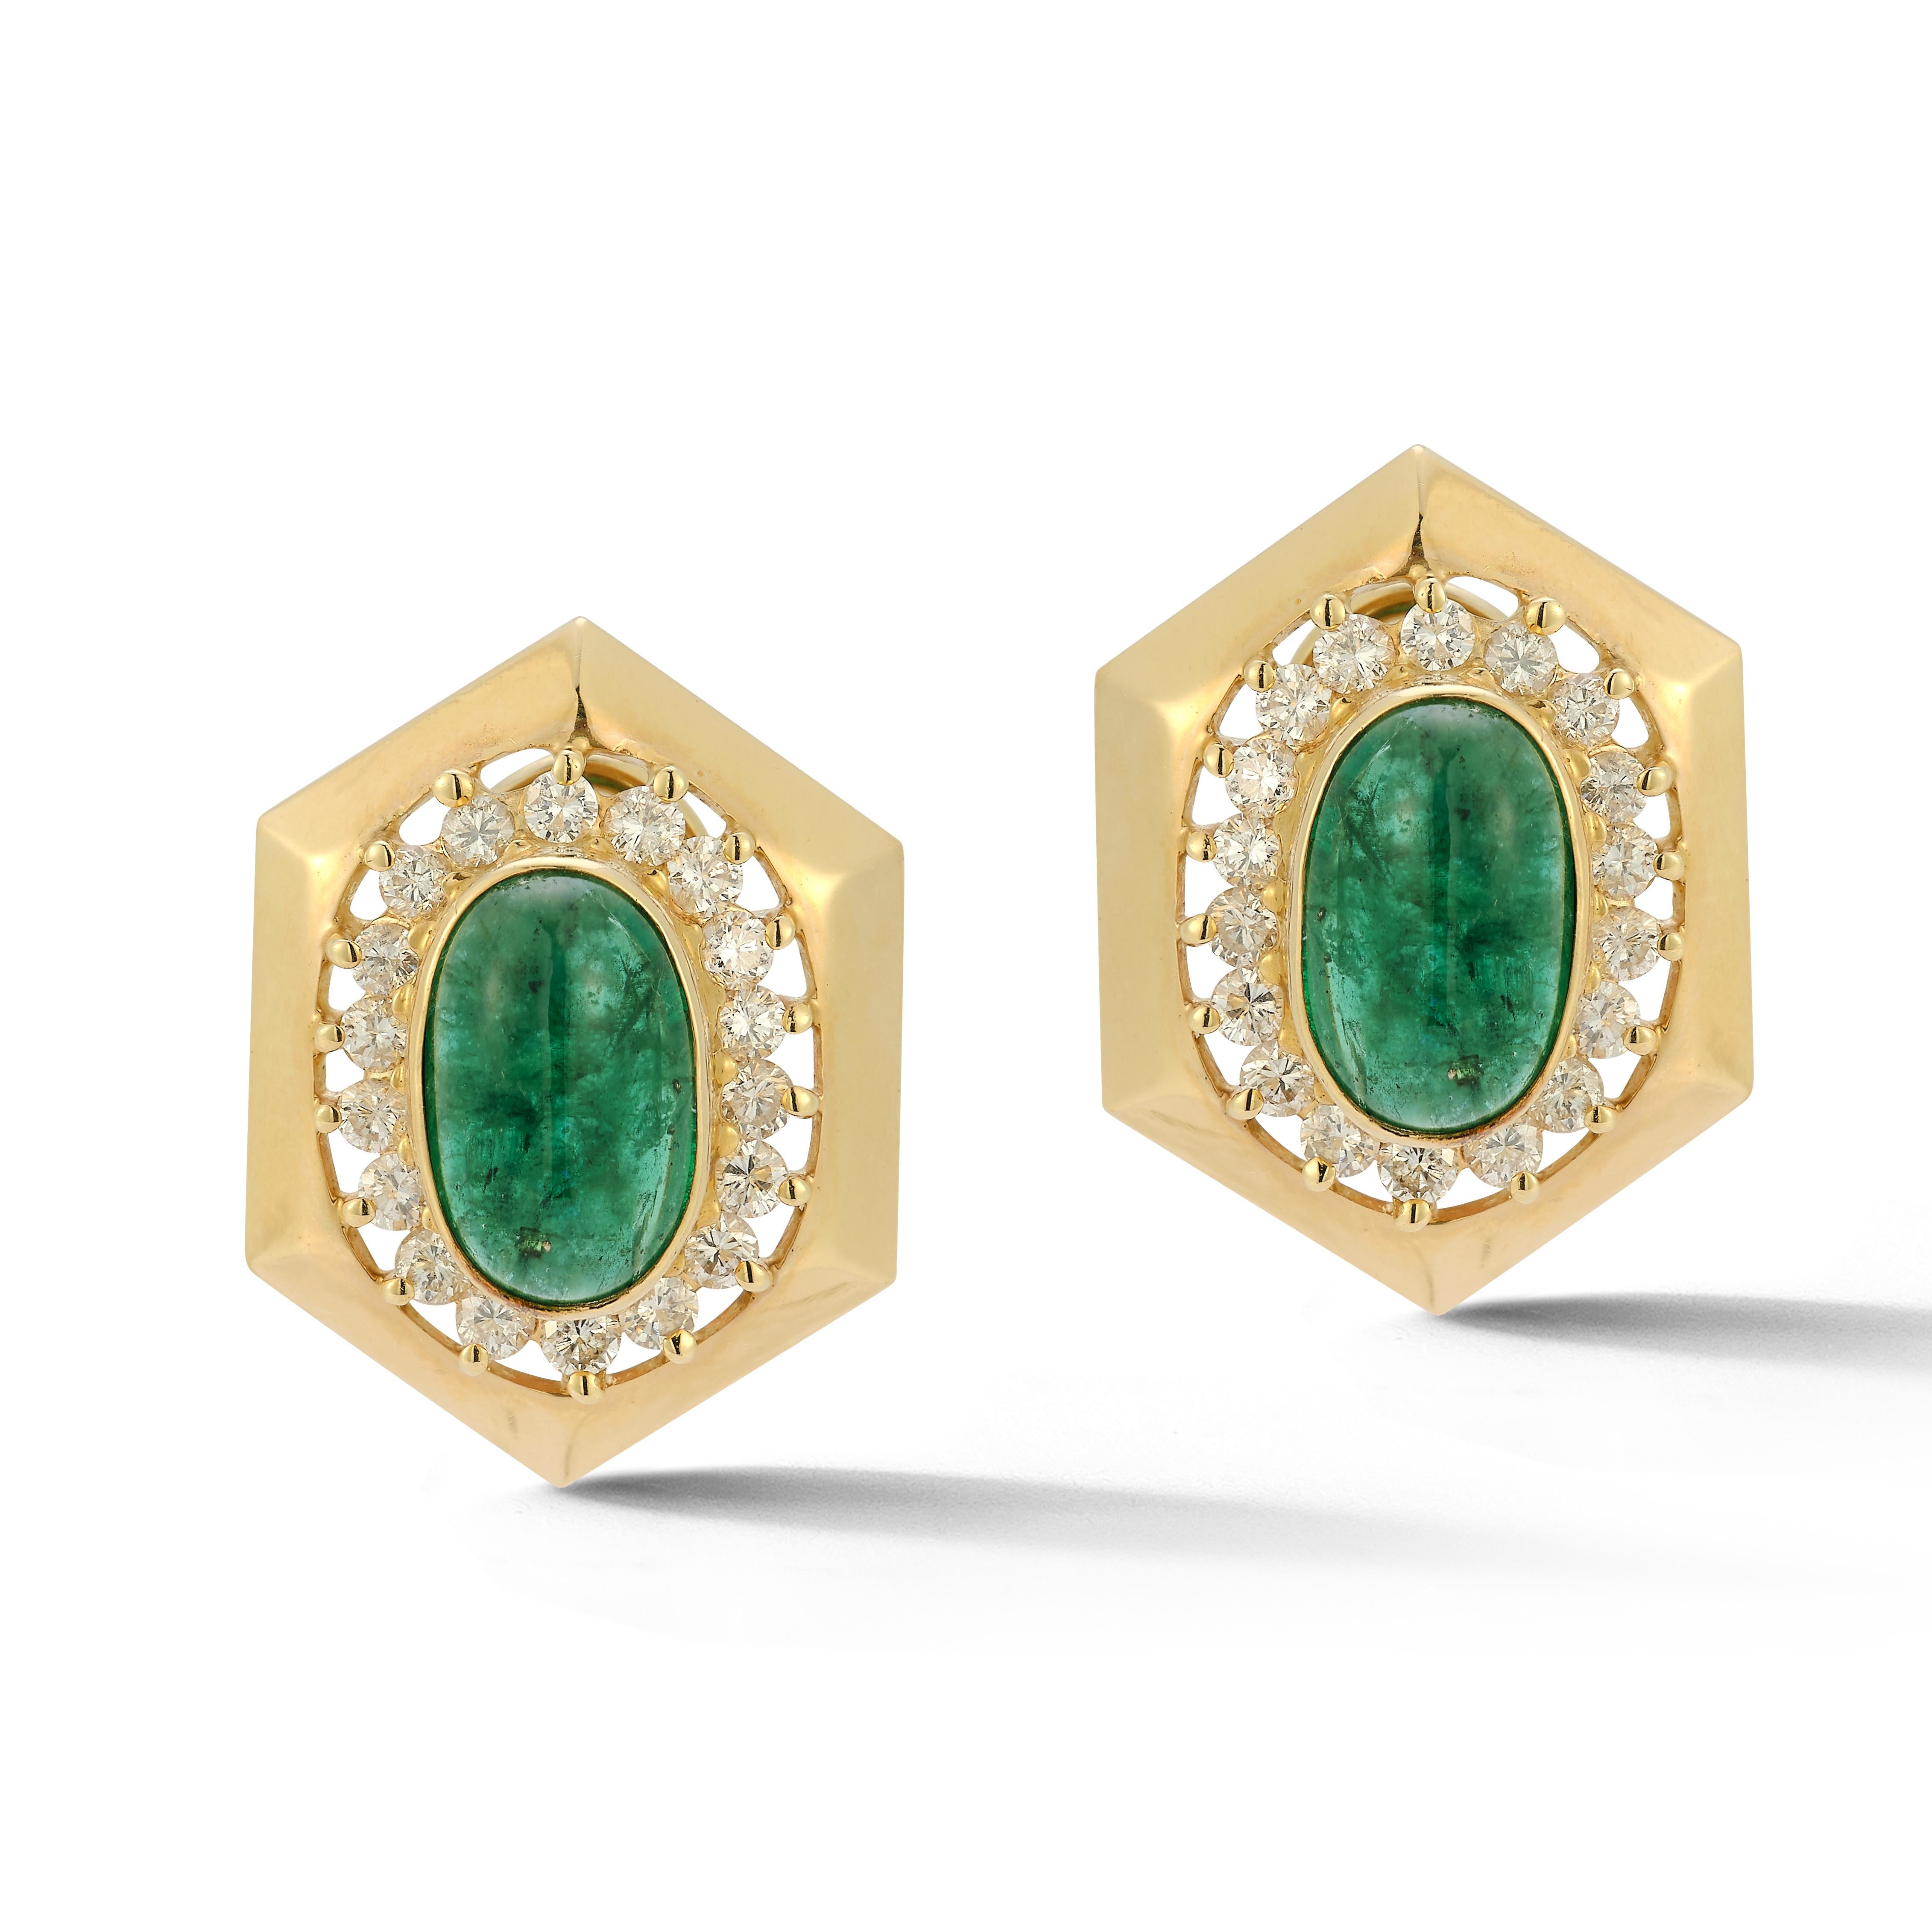 Cabochon Emerald & Diamond Earrings

Clip on earrings with a post, each with a center cabochon emerald with a halo of round diamonds set in 14k gold

Emerald approximate weight: 10.06ct

Diamond total approximate weight: 1.84ct